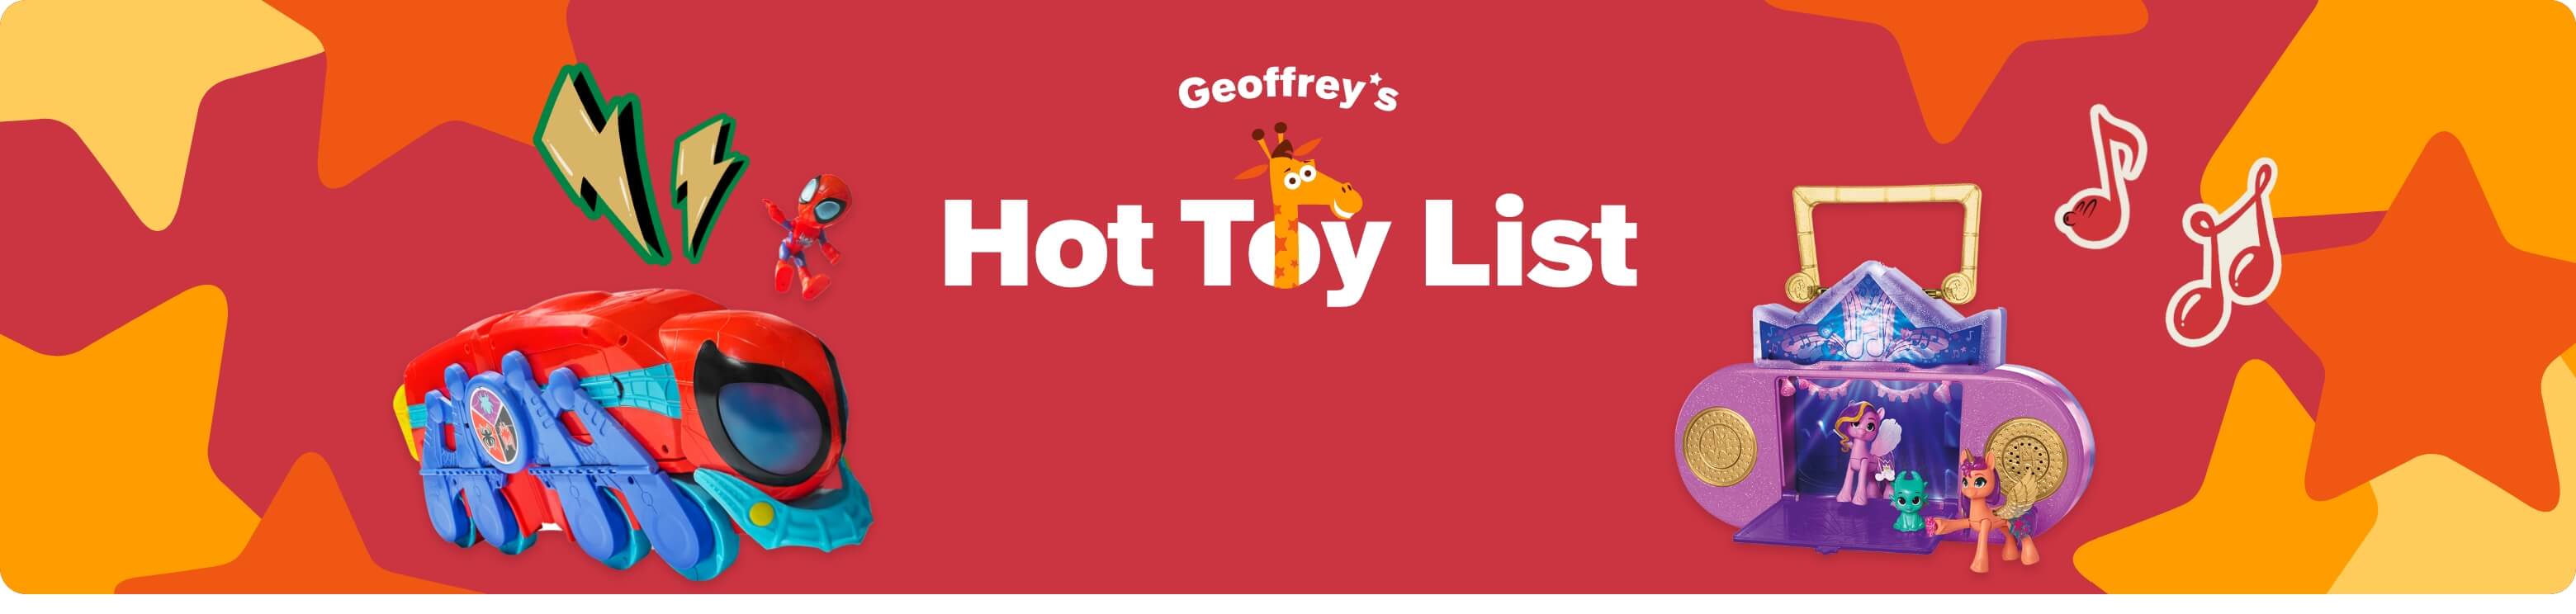 Hot toy list